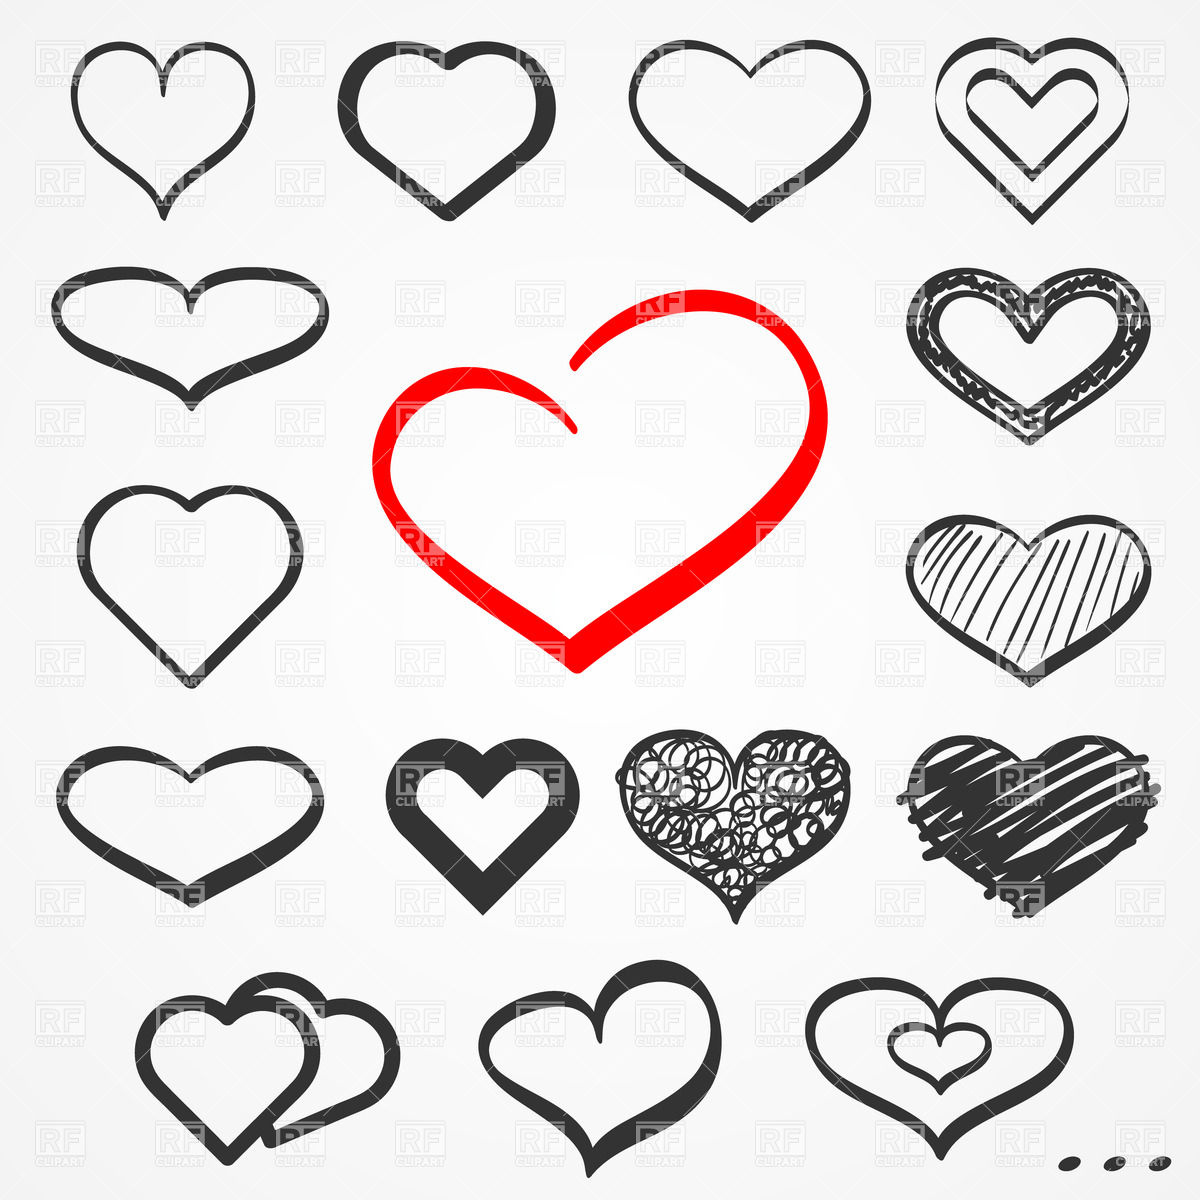 Sketch Hand Drawn Hearts Download Royalty Free Vector Clipart  Eps